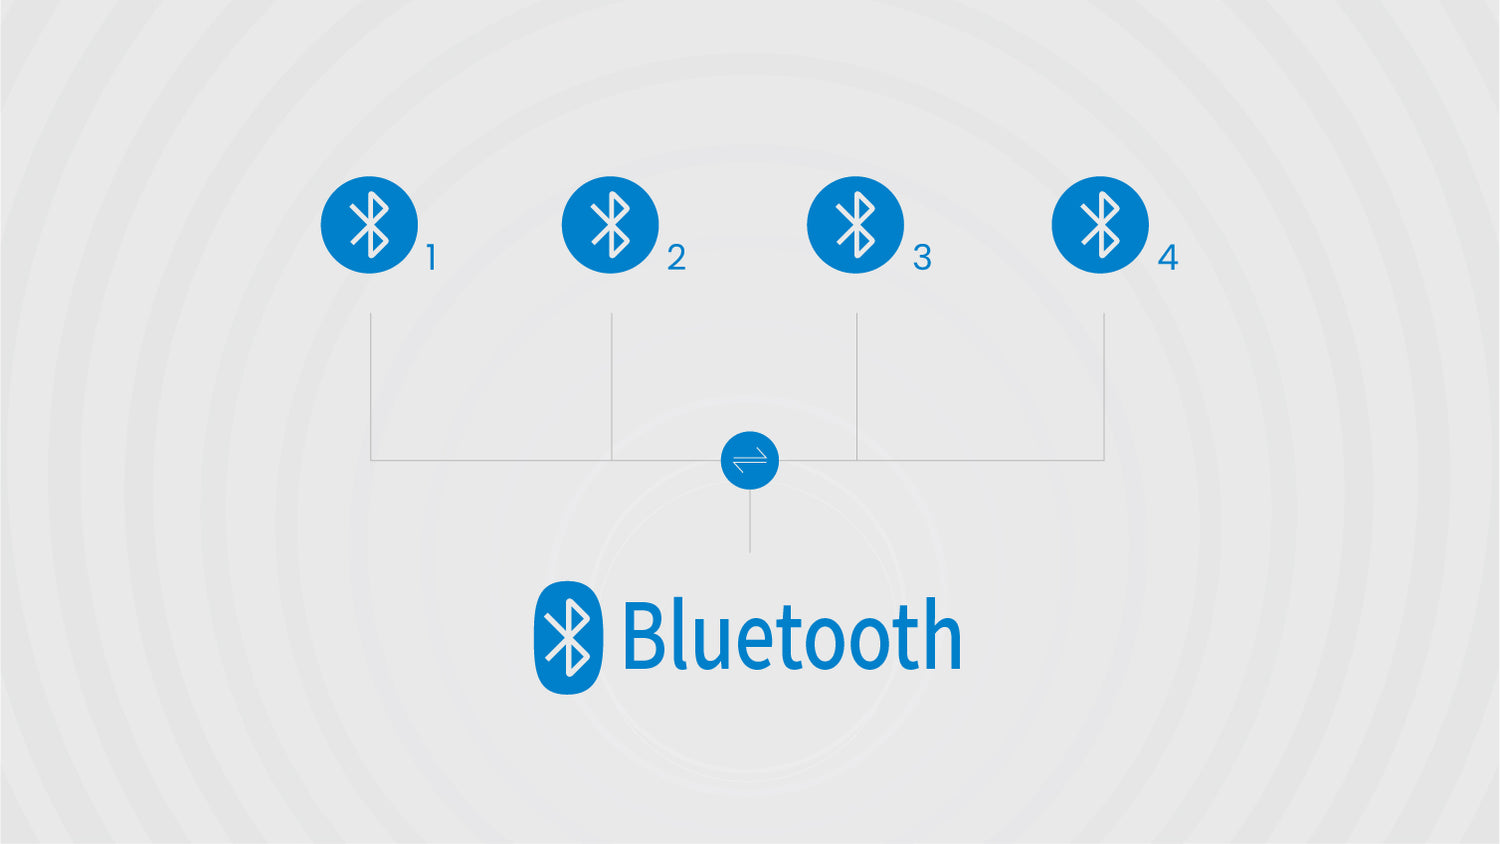 Steps for MojoPad Bluetooth Pairing/Switching